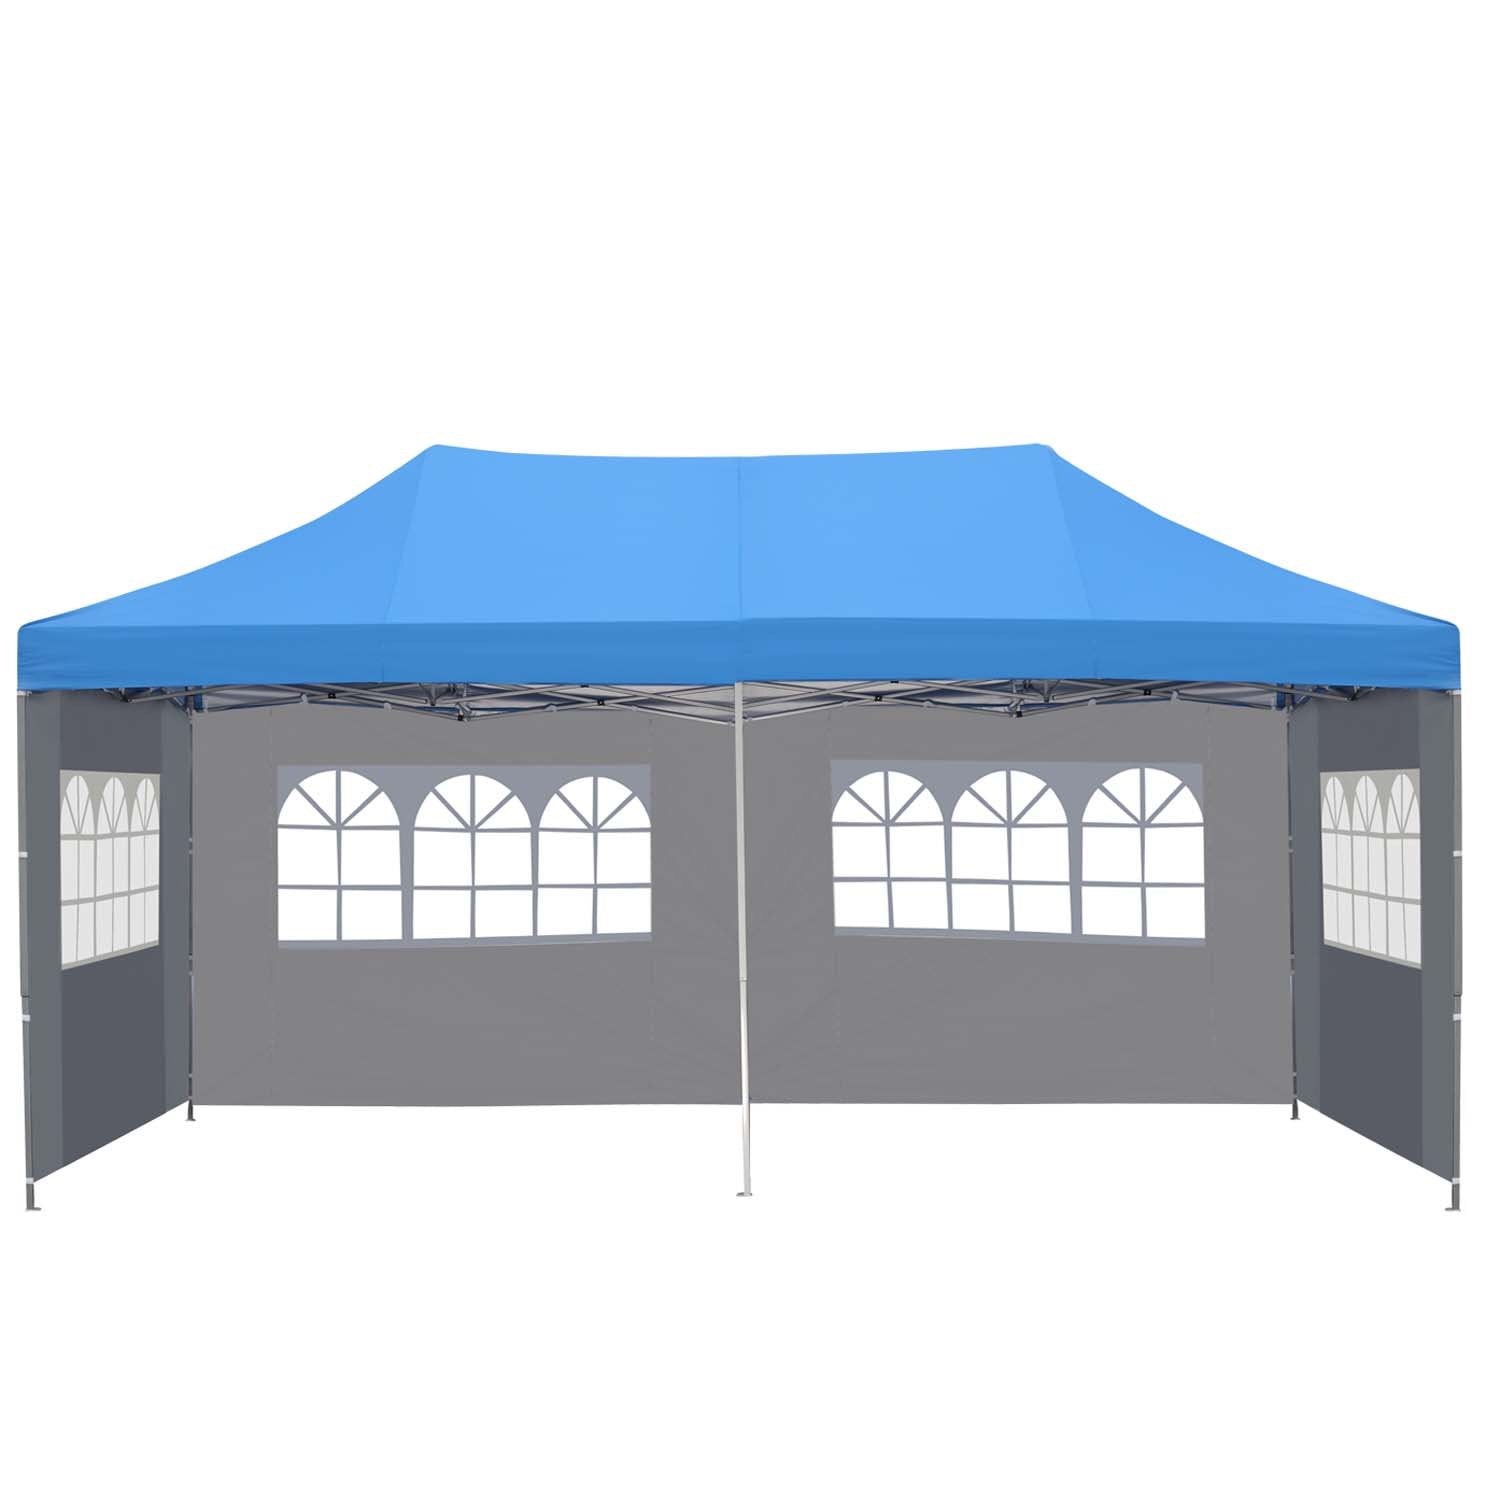 SKU: ODF013 - 10’ x 20’ Easy Pop Up and Close Canopy With 4 Walls and  Carrying Case - 4 Colors